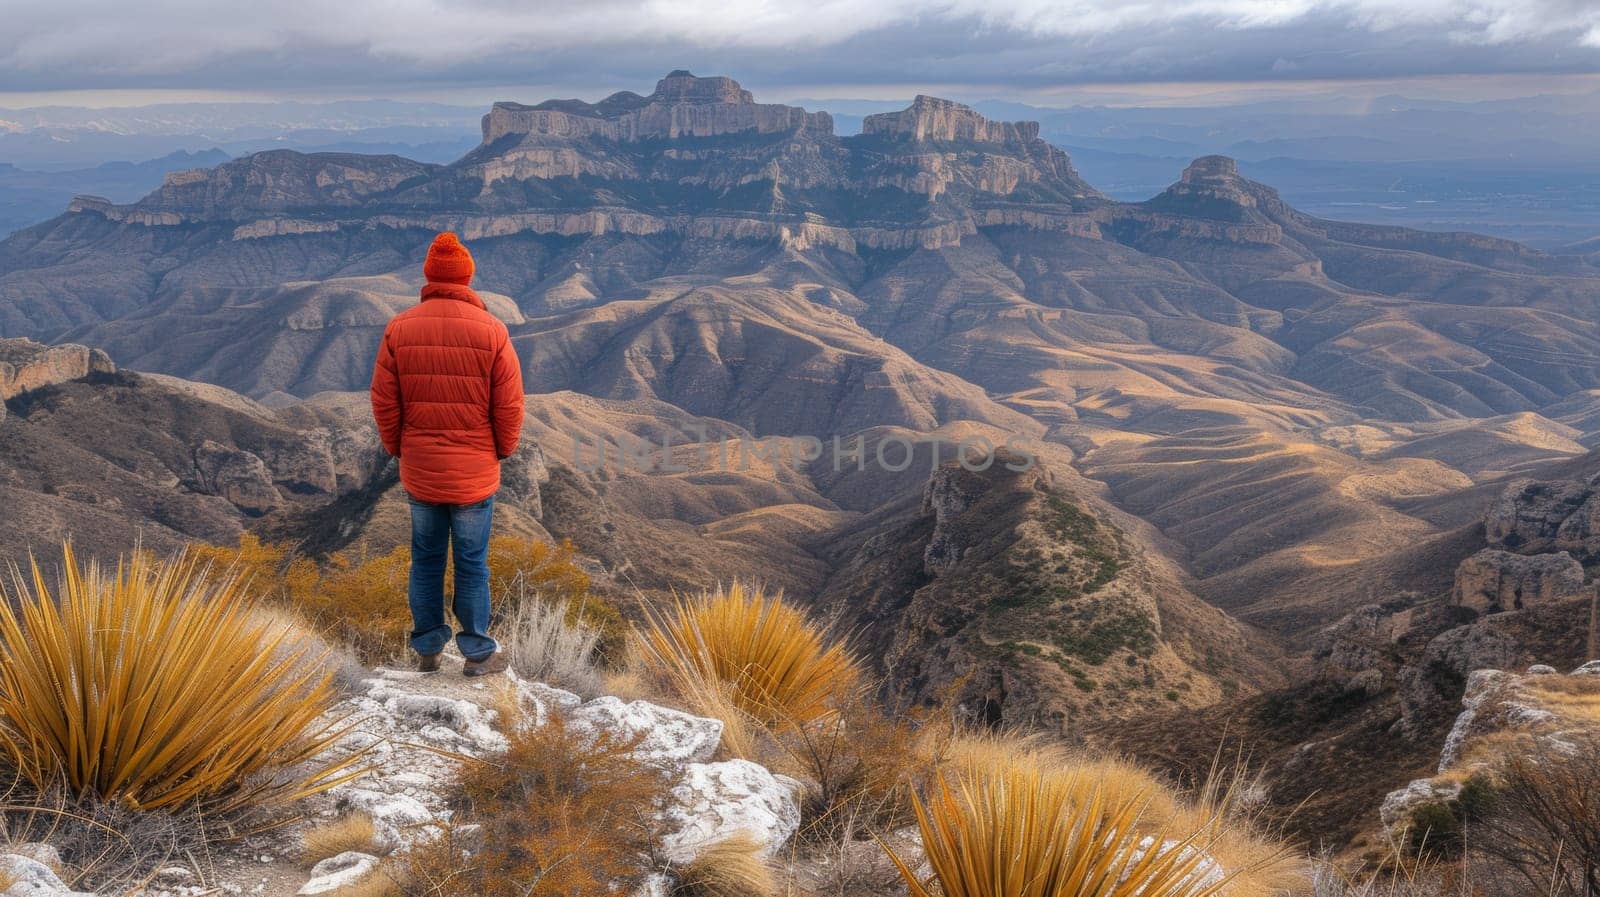 A man in red jacket standing on top of a mountain overlooking the desert, AI by starush